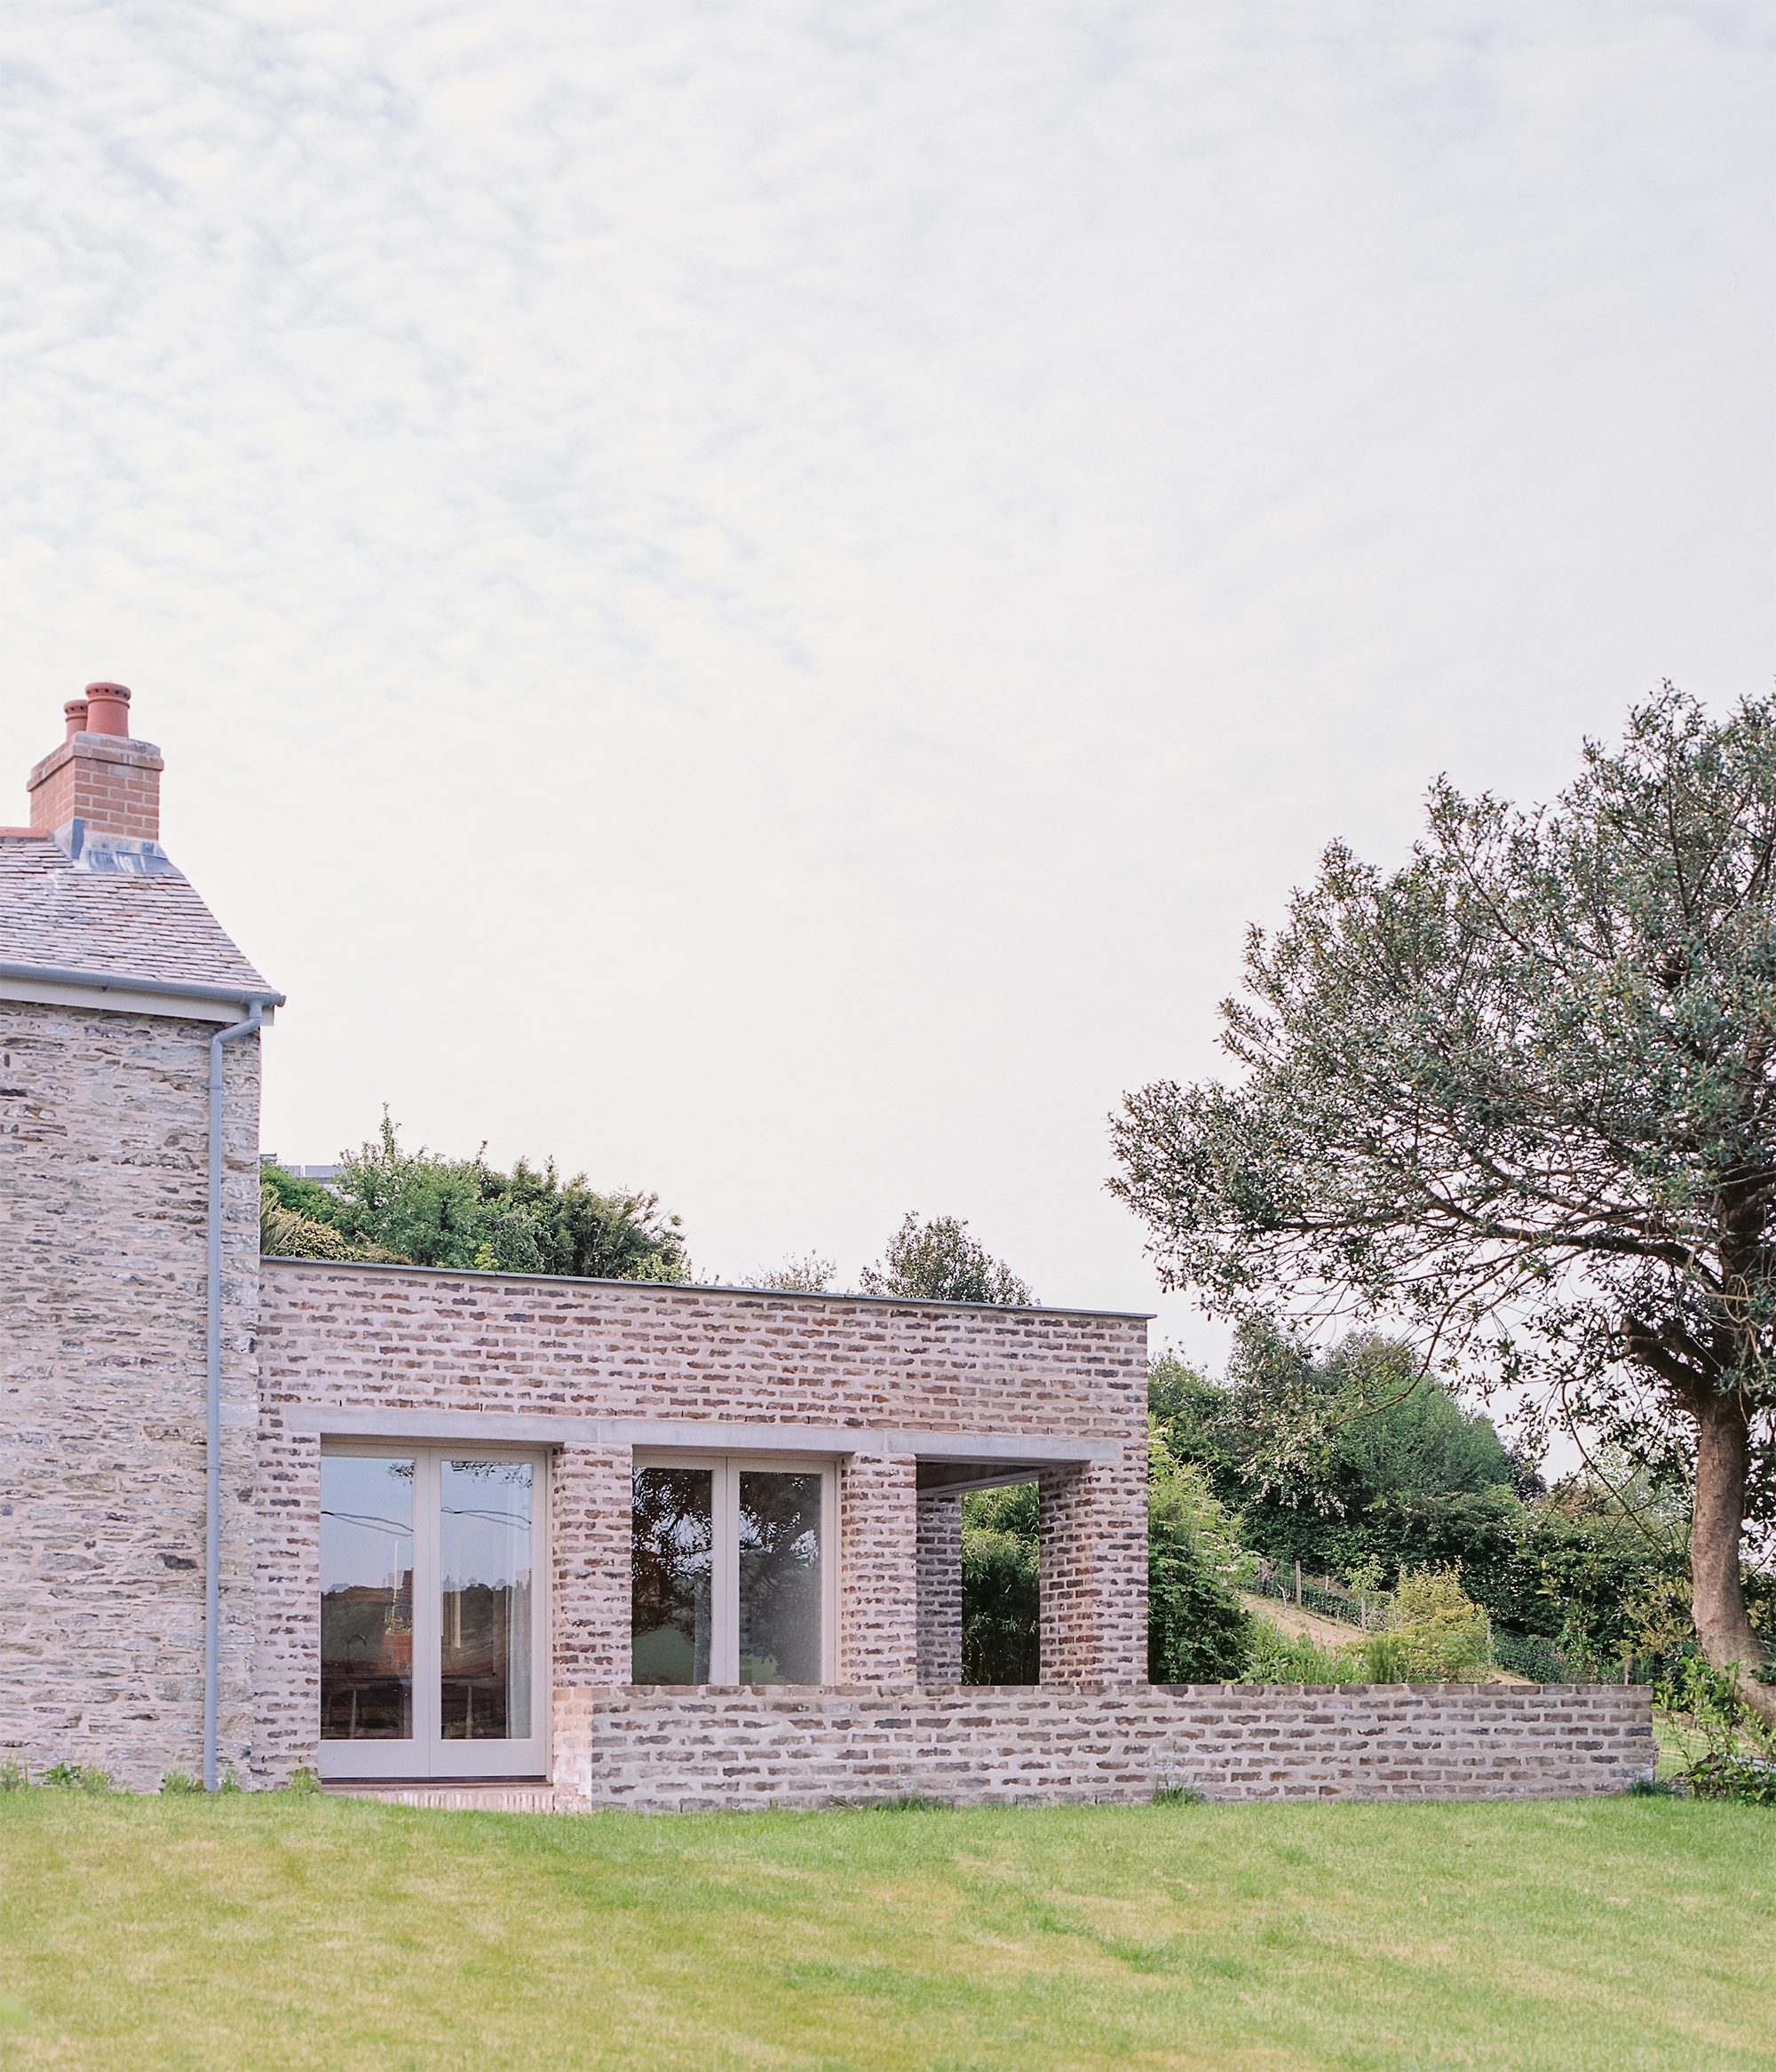 Cornwall Cottage by Architecture Office - Gessato